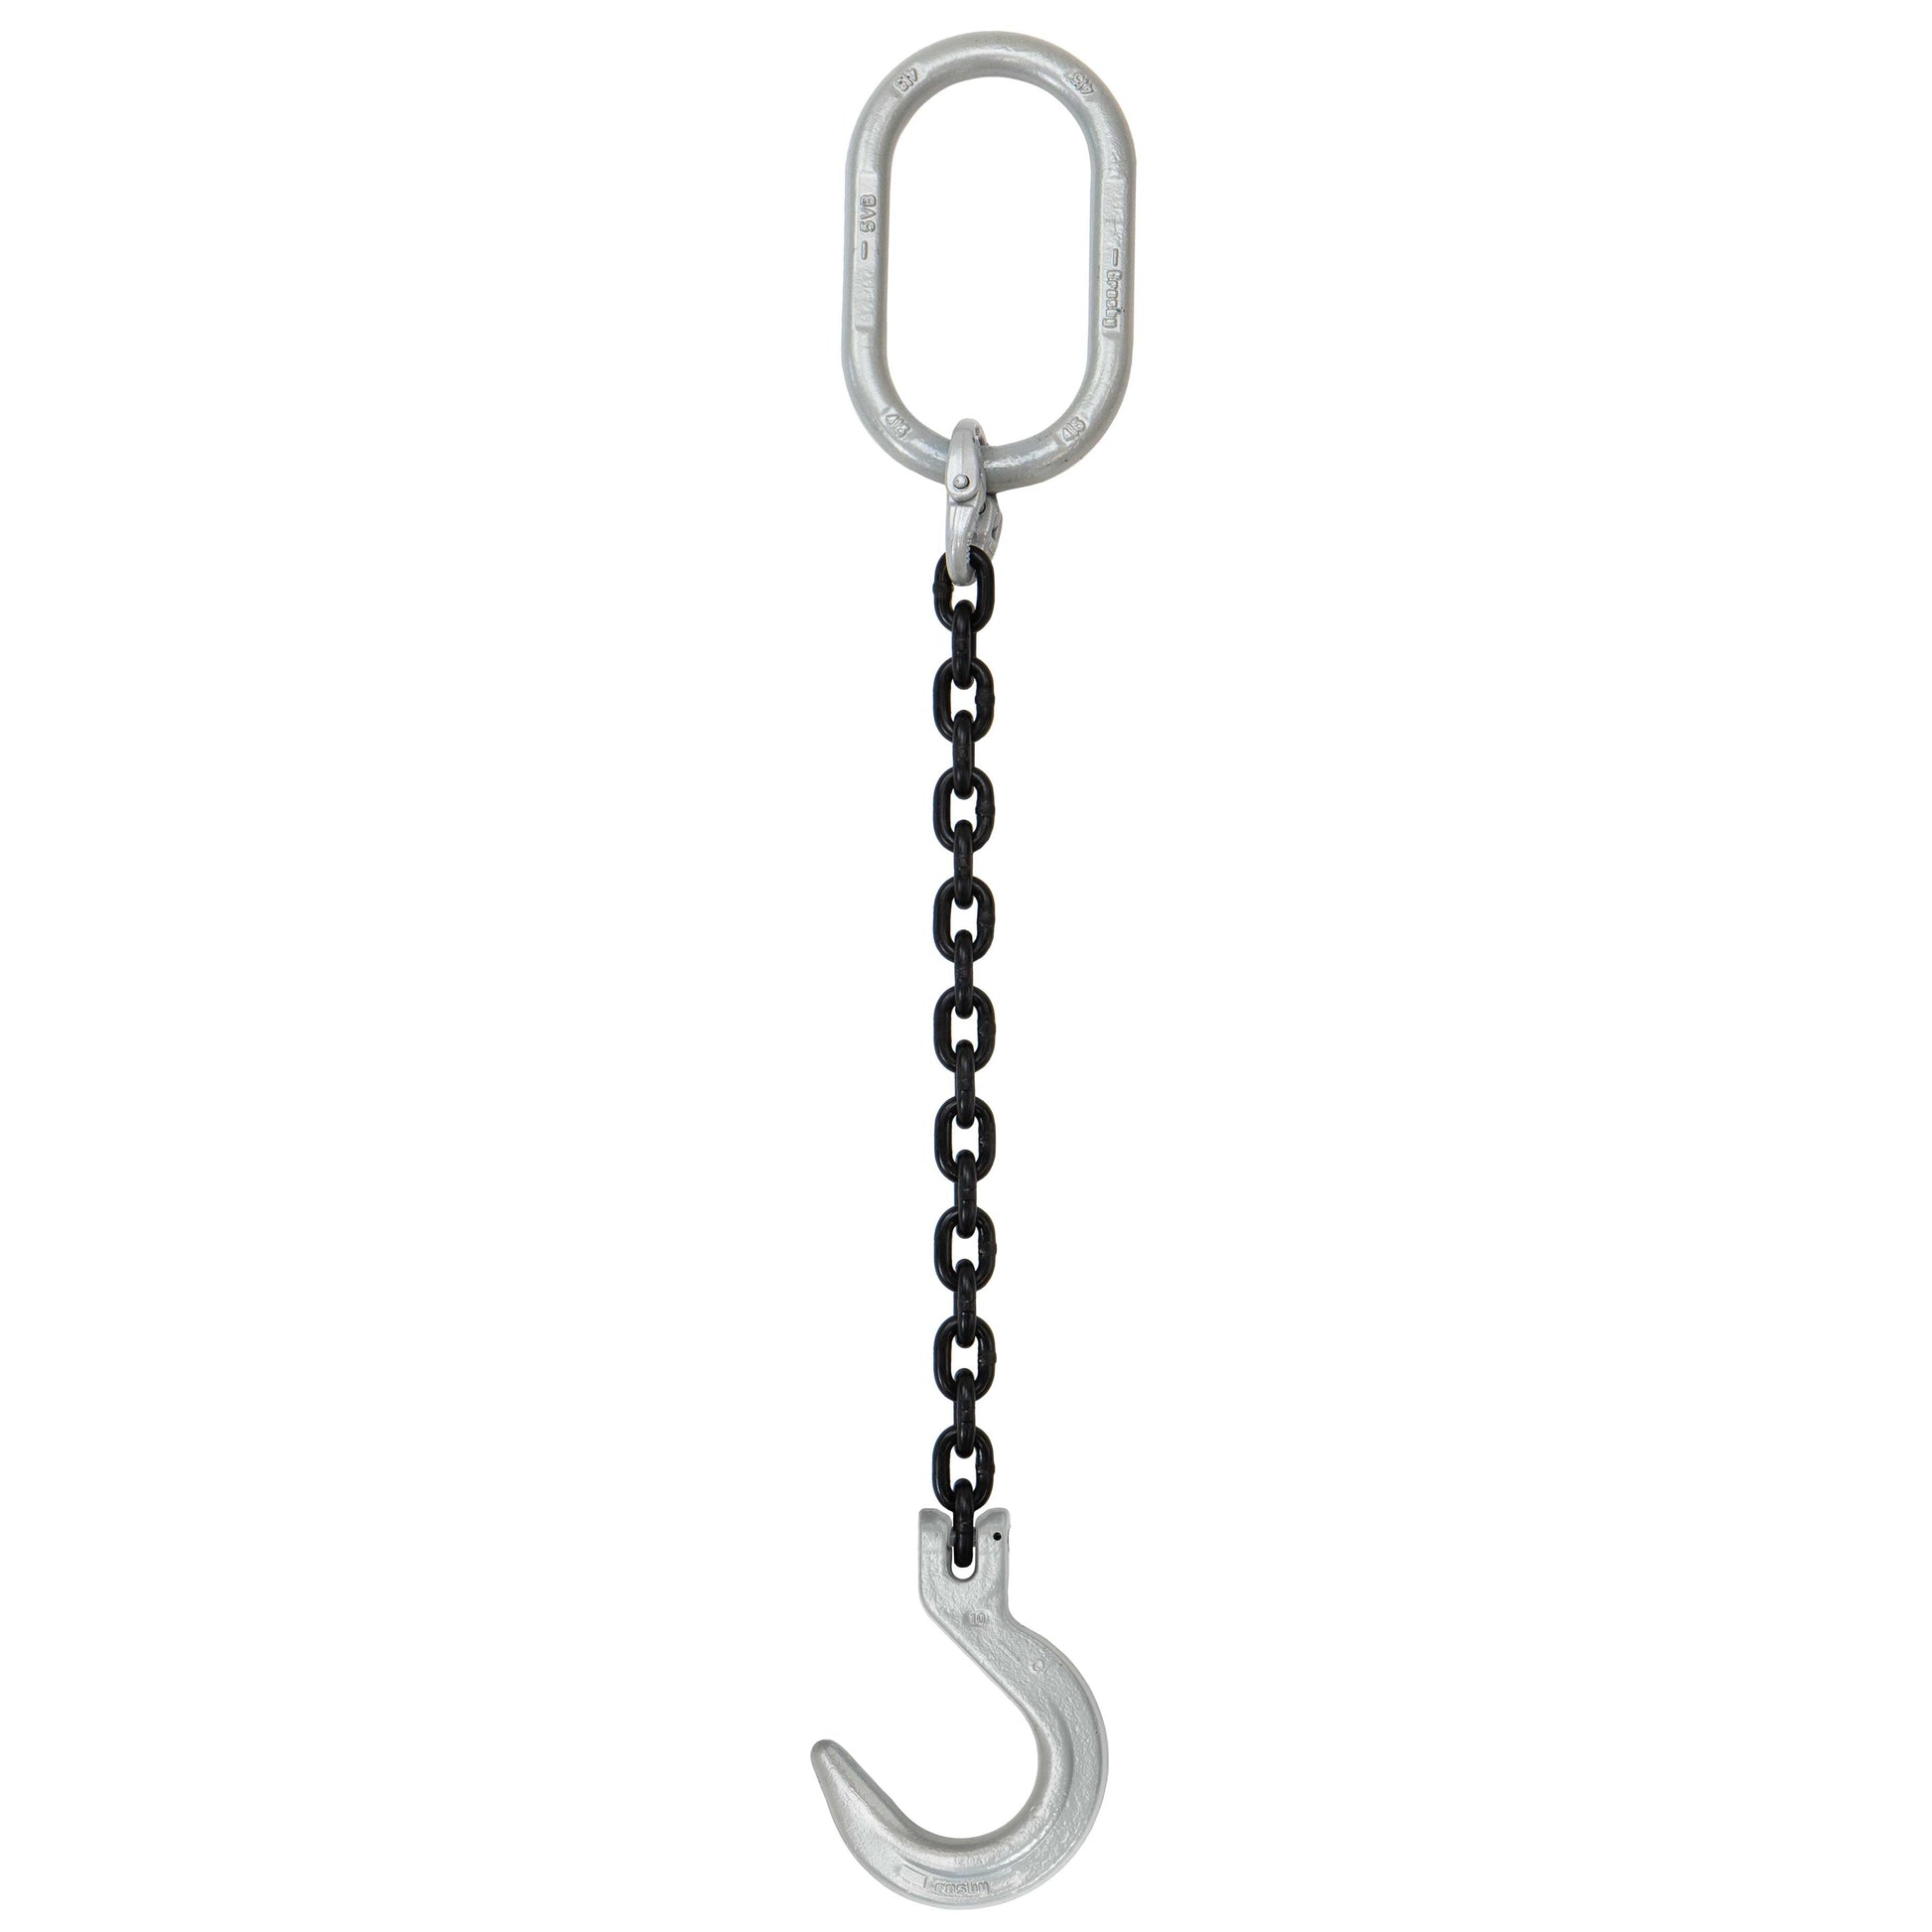 38 inch x 12 foot Domestic Single Leg Chain Sling w Crosby Foundry Hook Grade 100 image 1 of 2